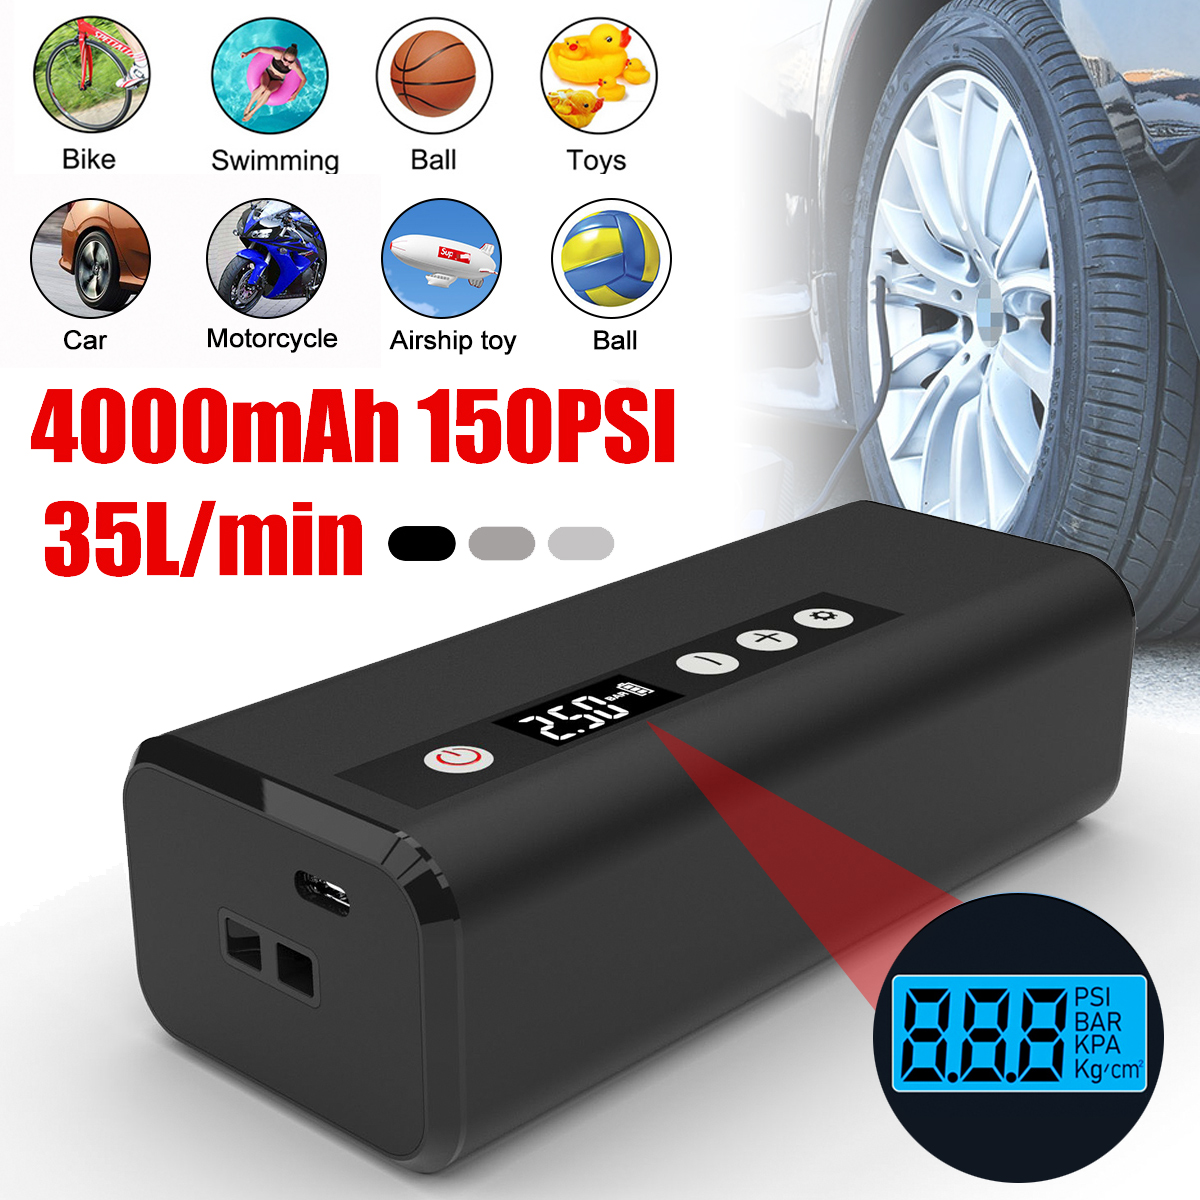 4000mAh 150PSI 35L/min Rechargeable Air Compressor Electric Tyre Tire Inflator Mini Auto Air Inflatable Pump Car Bicycle Boat